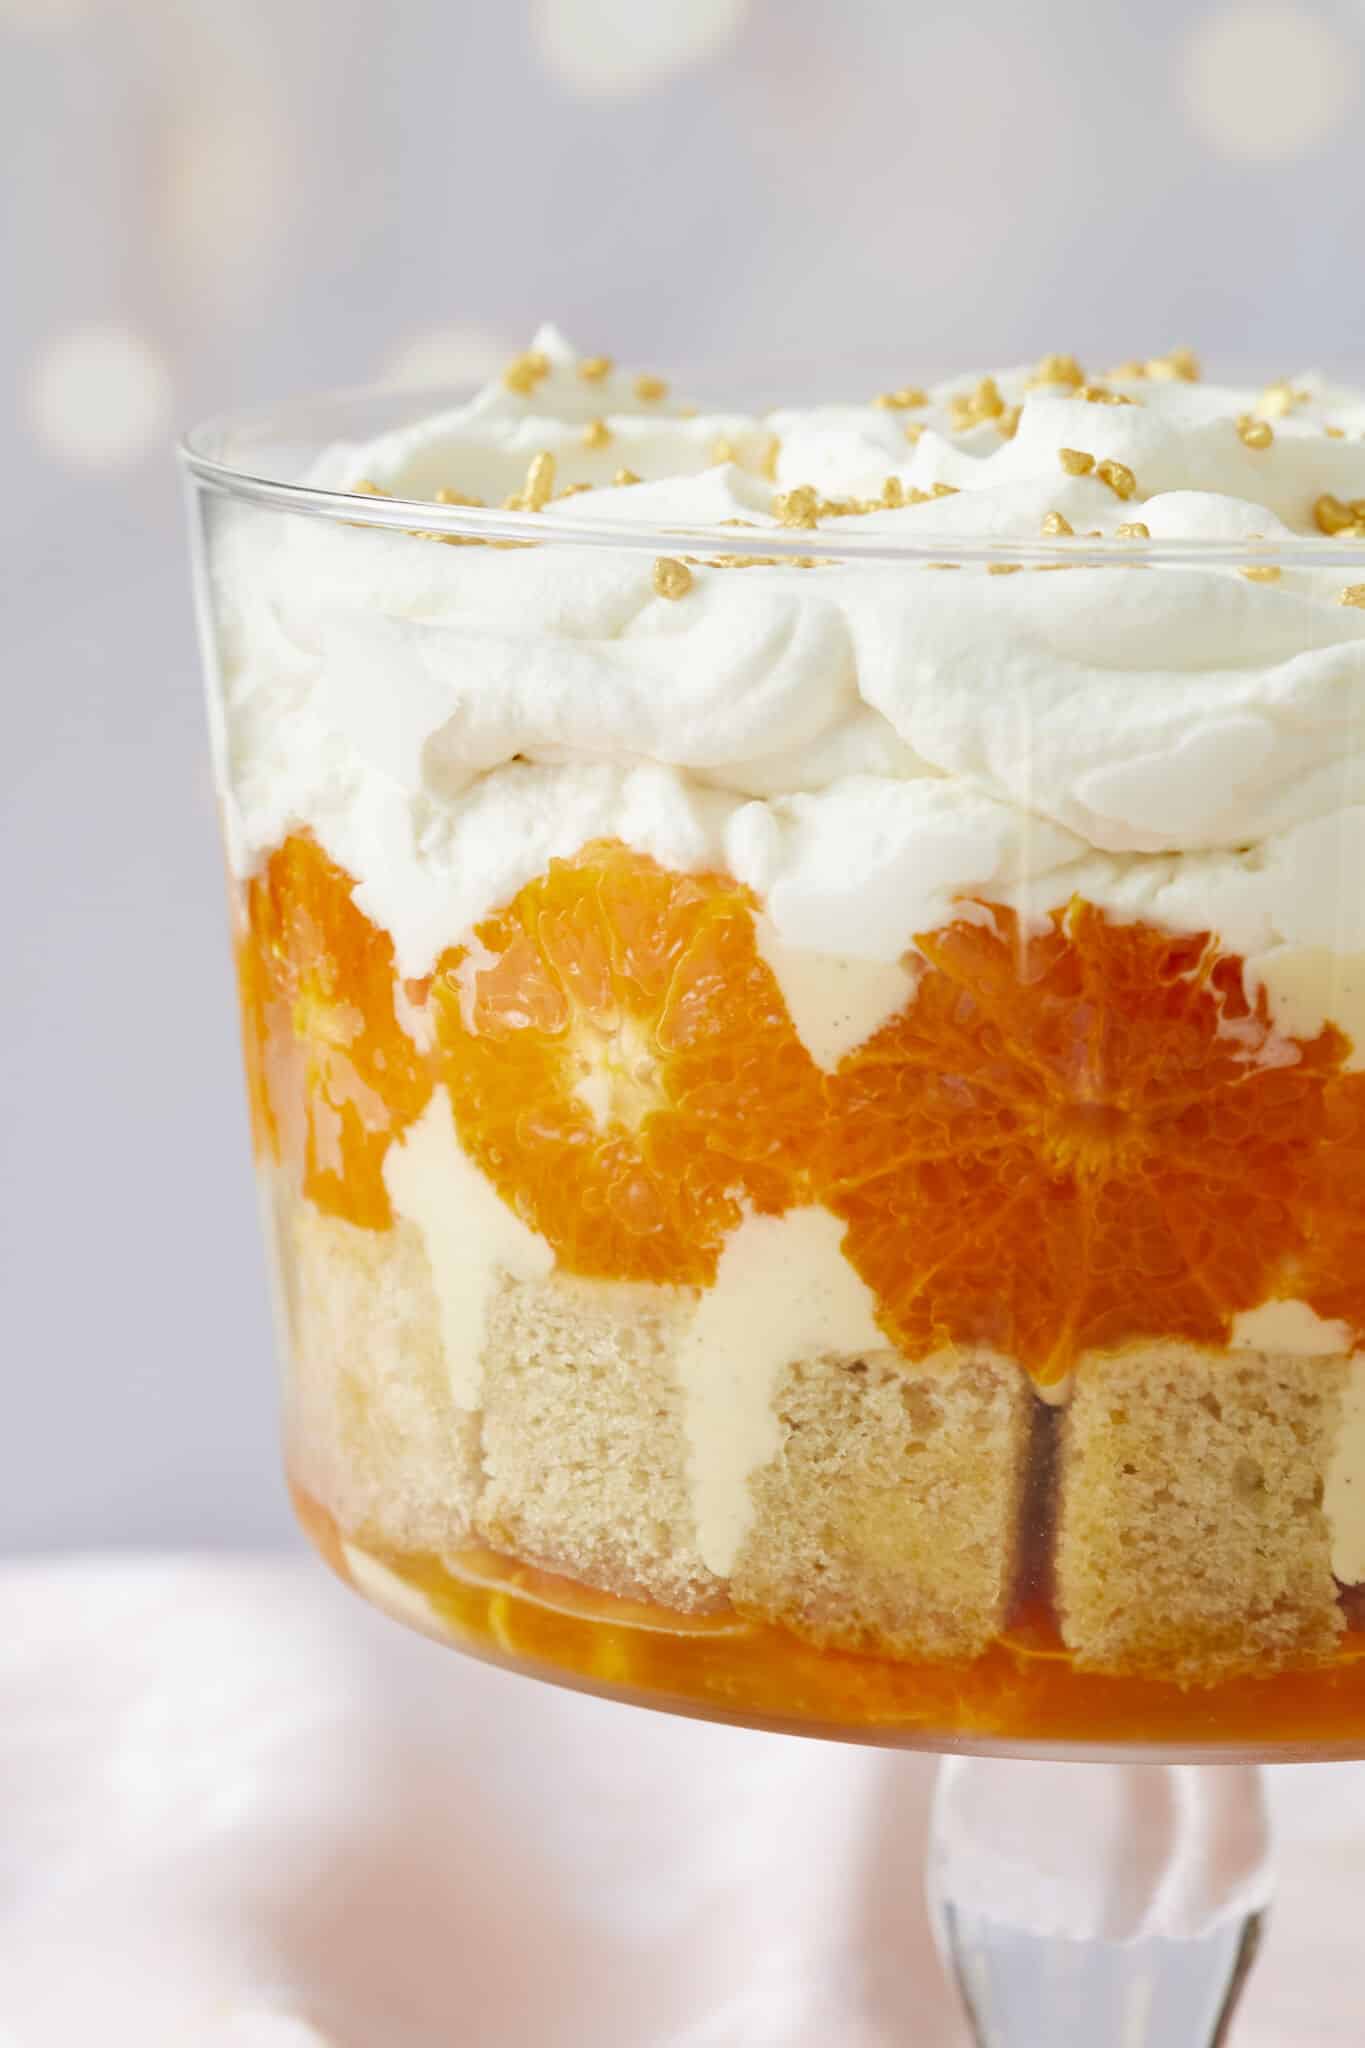 A close-up shot at the stunning Sweet and Zesty Clementine Trifle with Boozy Amaretto shows layers of clementine syrup, cubed sponge cake, caramelized clementines, crème anglaise, lemon curd, and Amaretto whipped cream. Three glass dessert cups and one serving spoon are on the side. 